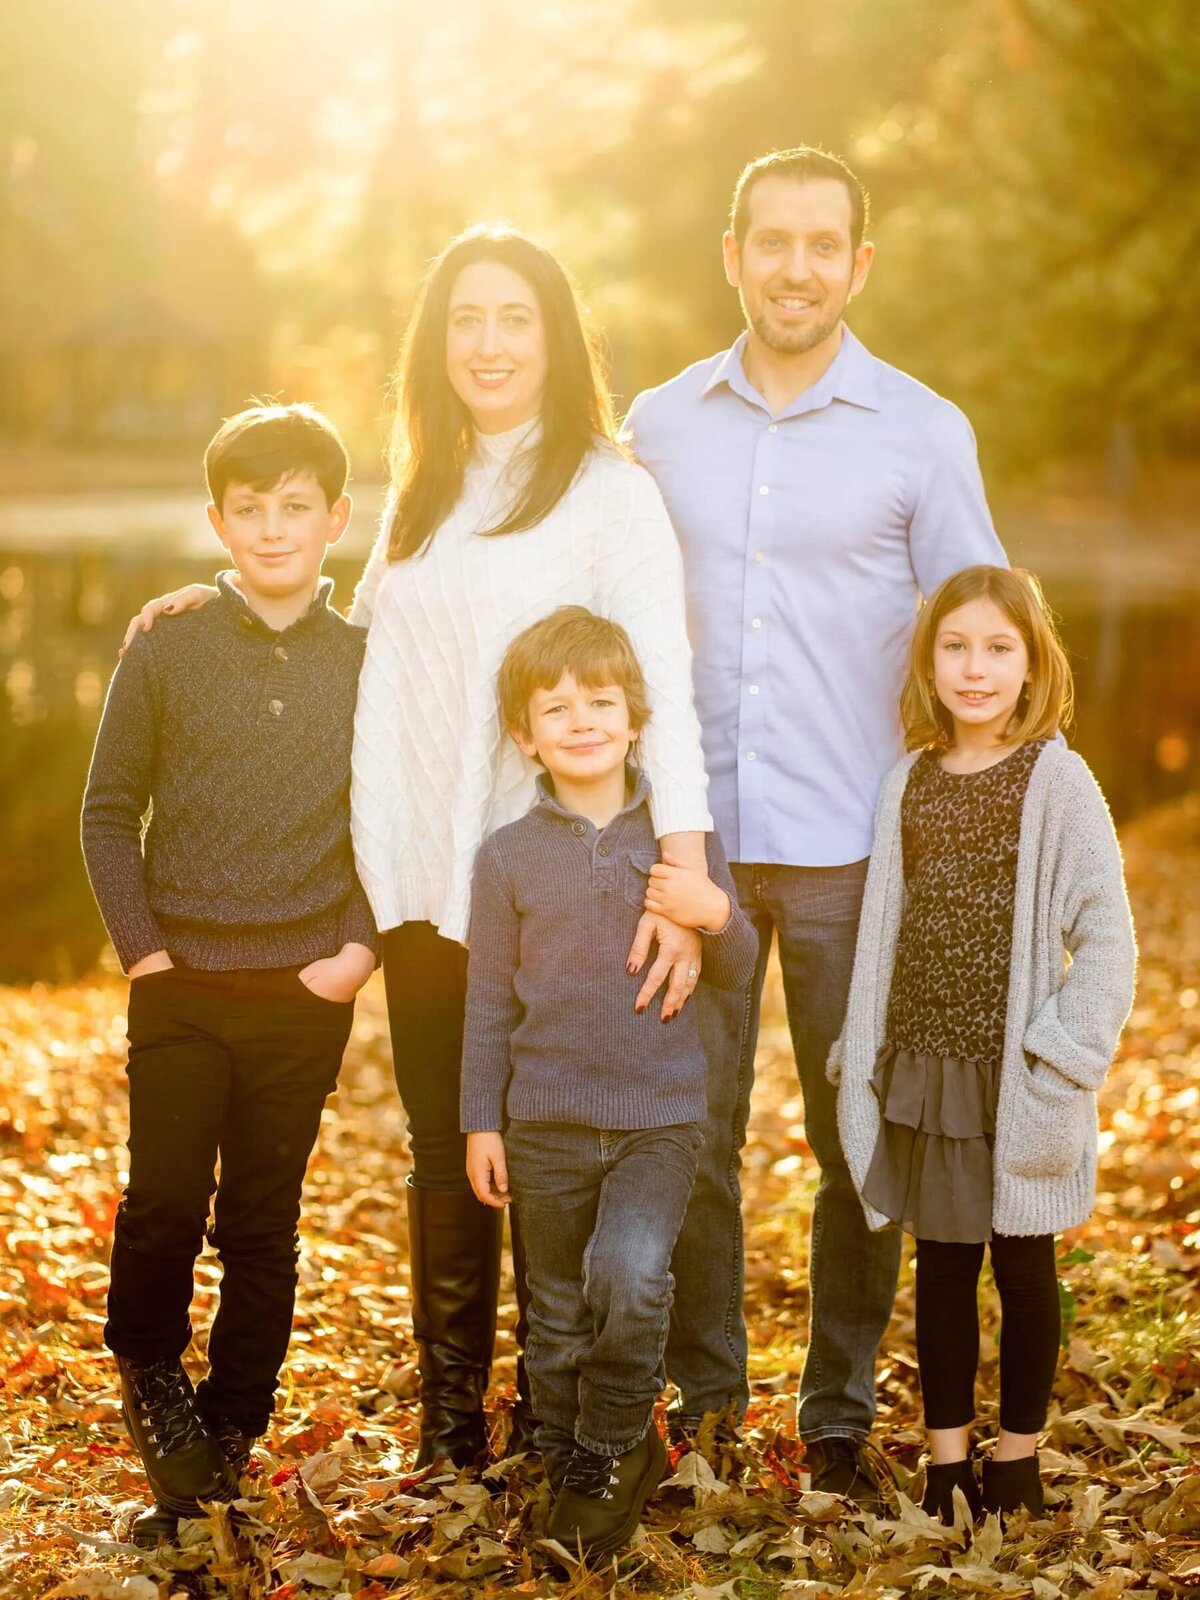 Parents with three kids standing on a wooded area covered in leaves.